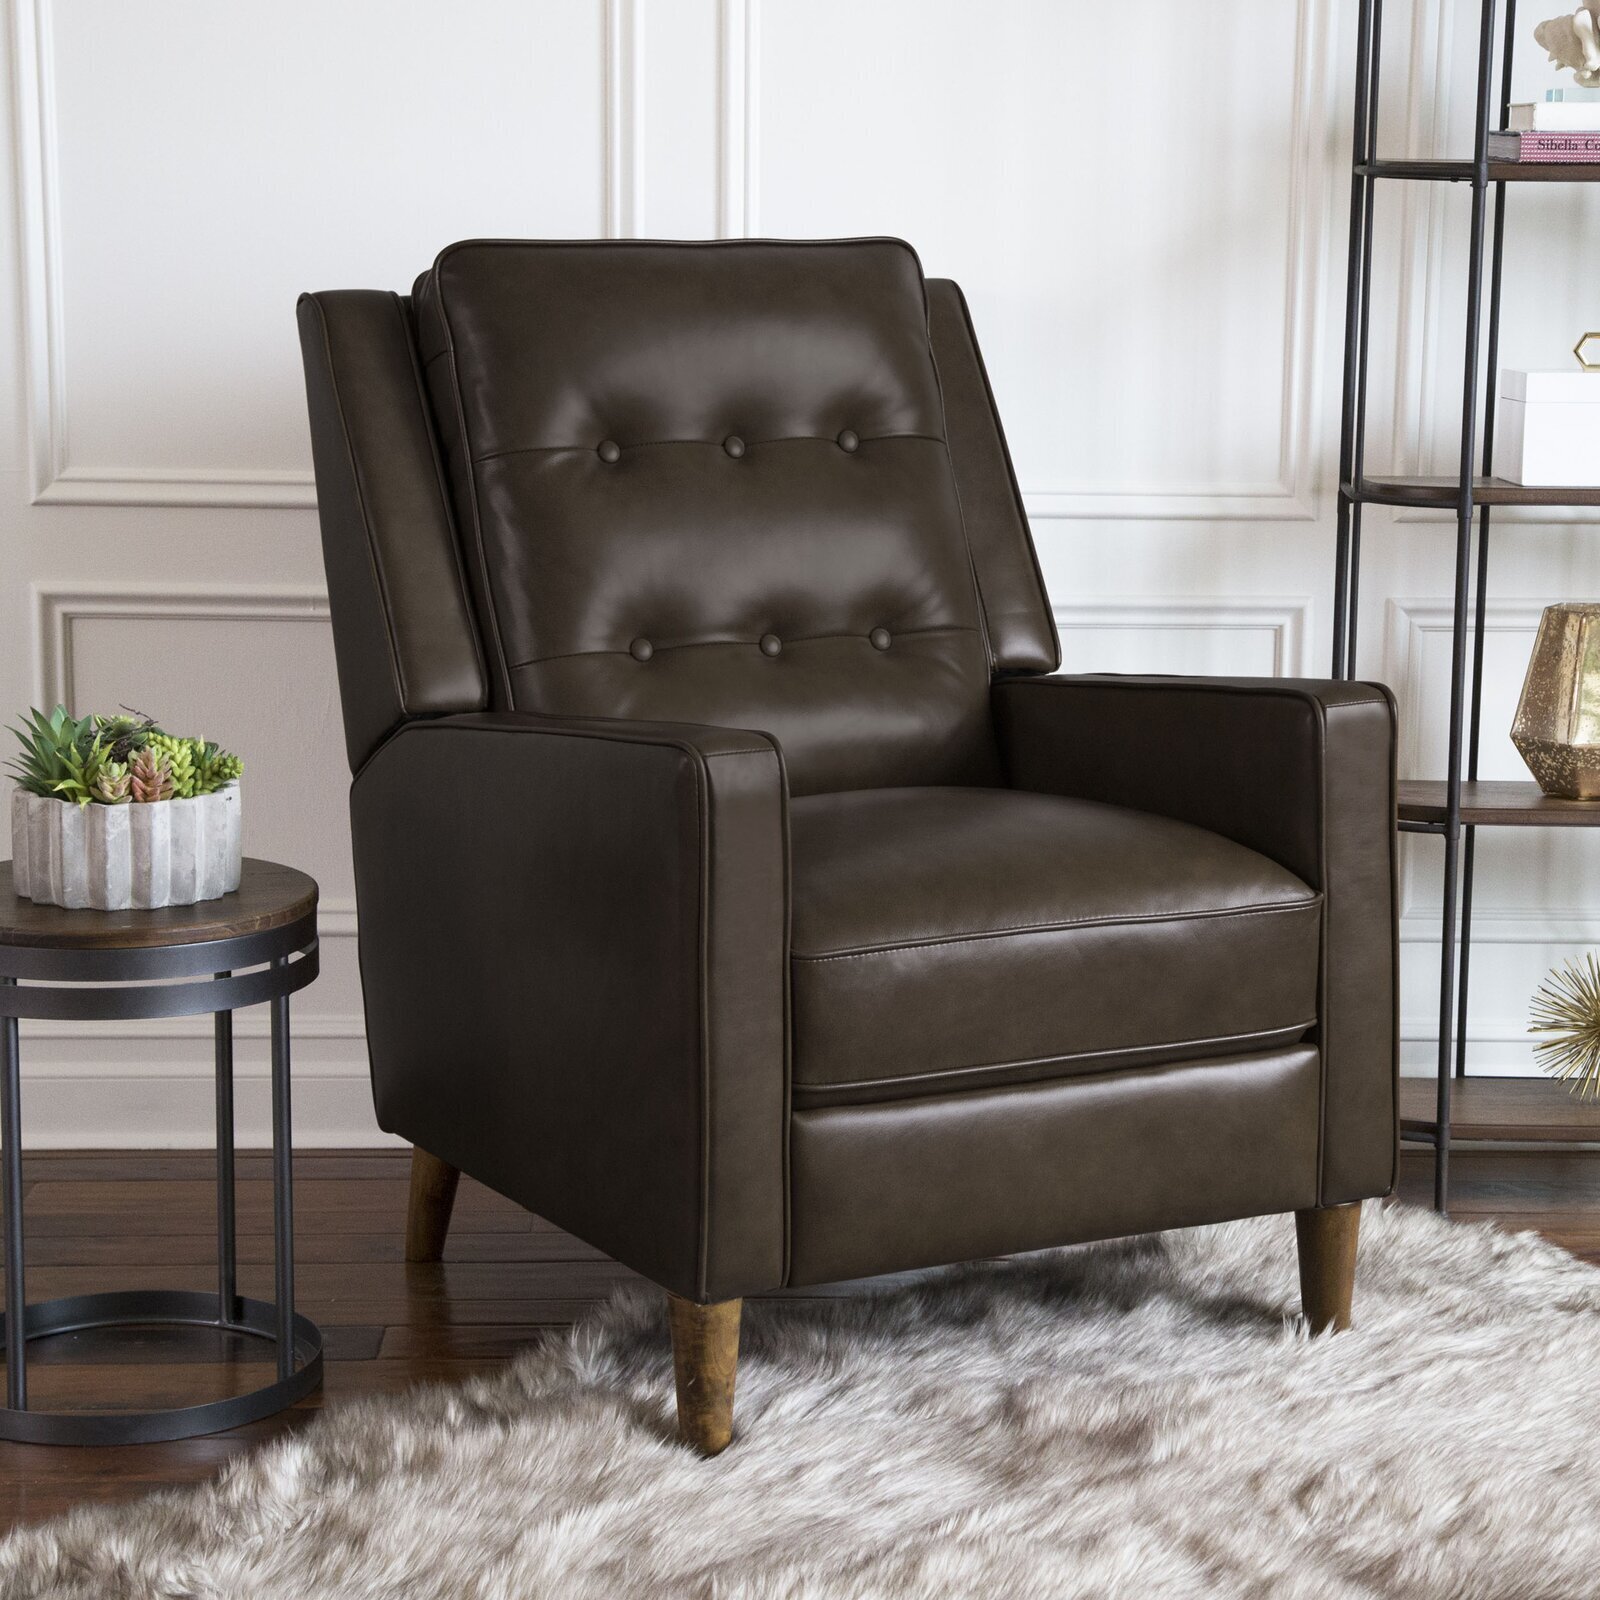 Luxurious Leather Comfy Recliner Chair